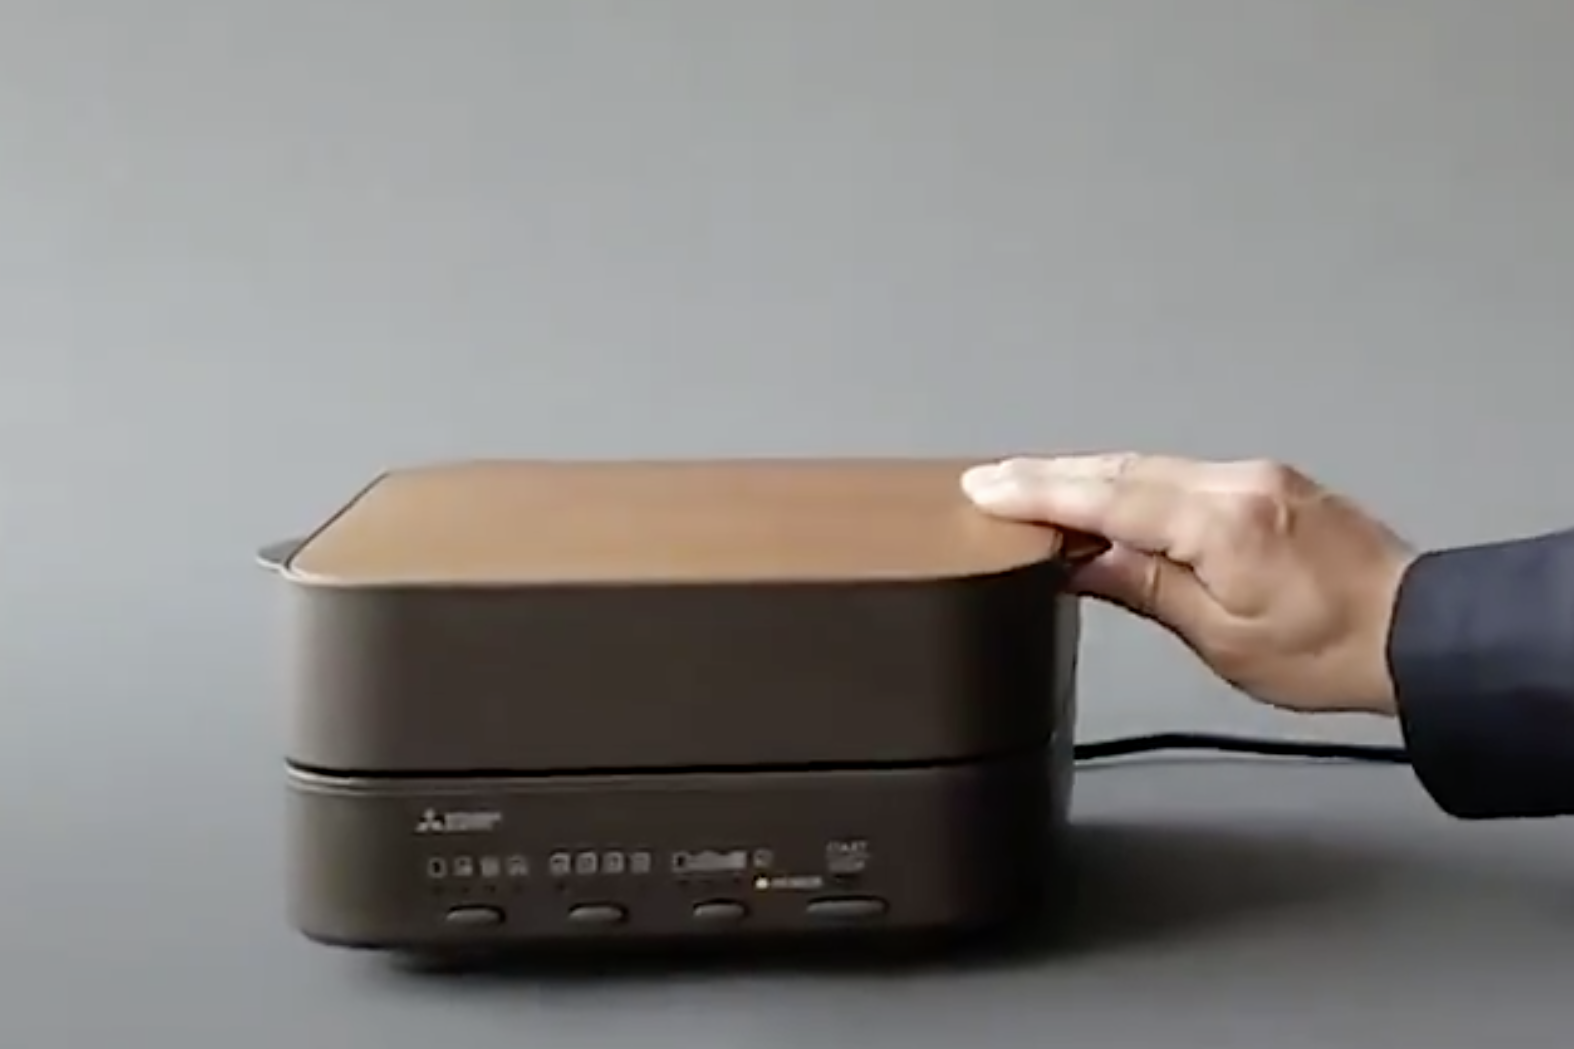 This Japanese Toaster Costs $270. It Only Makes One Slice at a